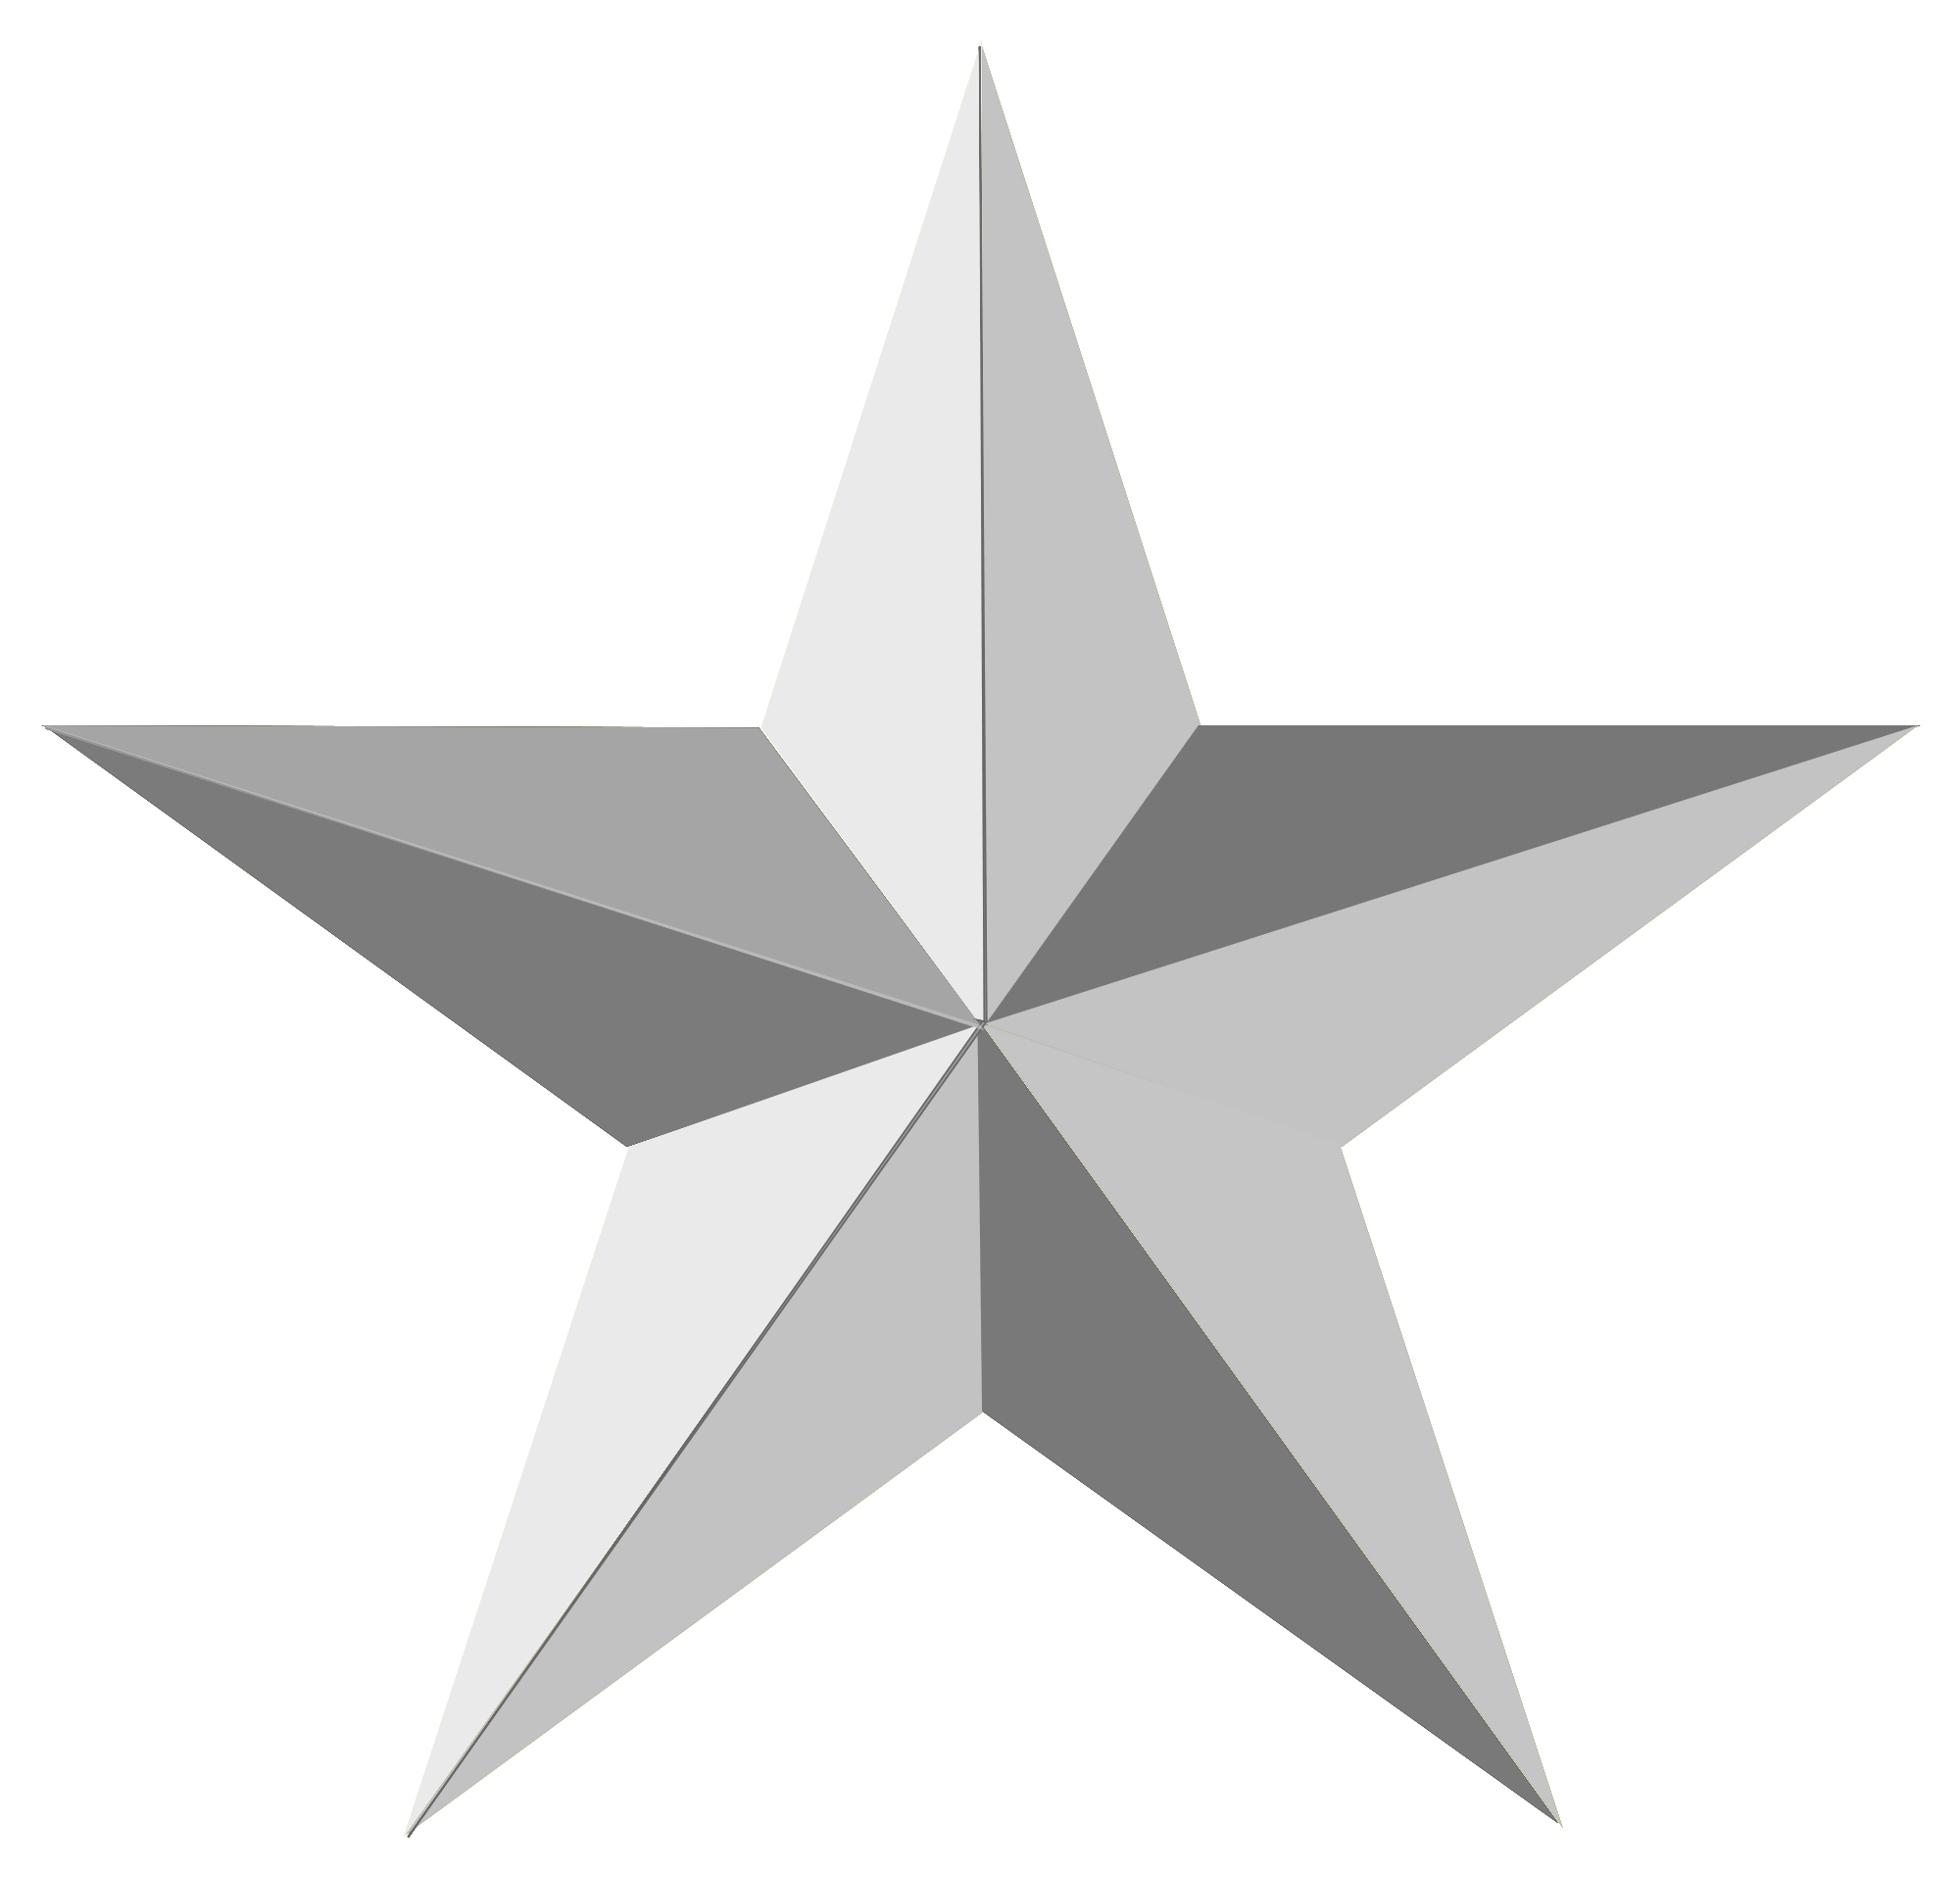 Star PNG Transparent Images | PNG All